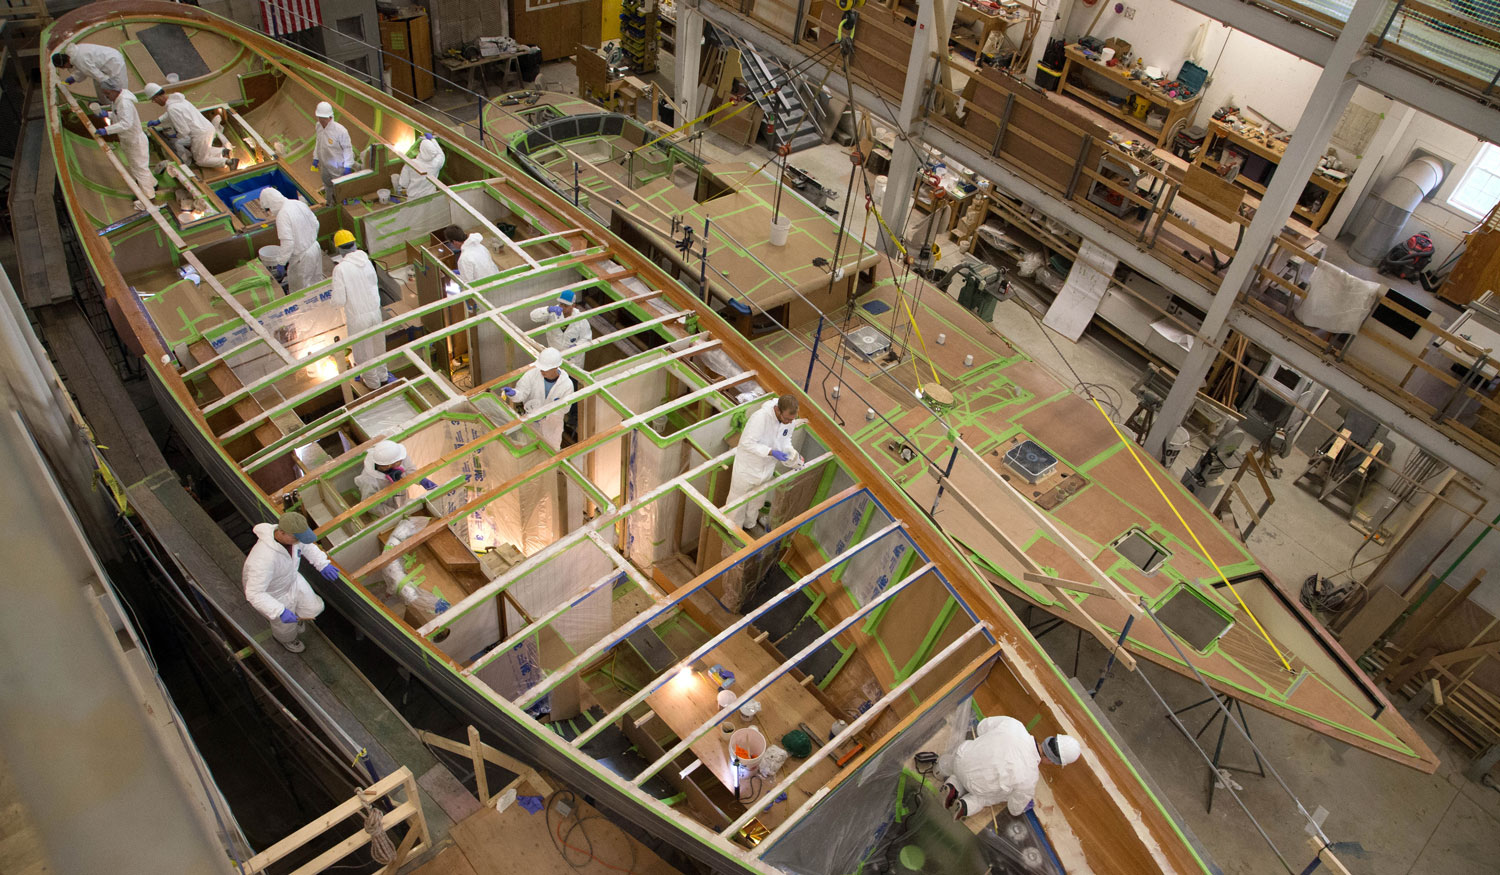 Boatbuilding at Lyman-Morse is a fusion of technology, design, and craftsmanship